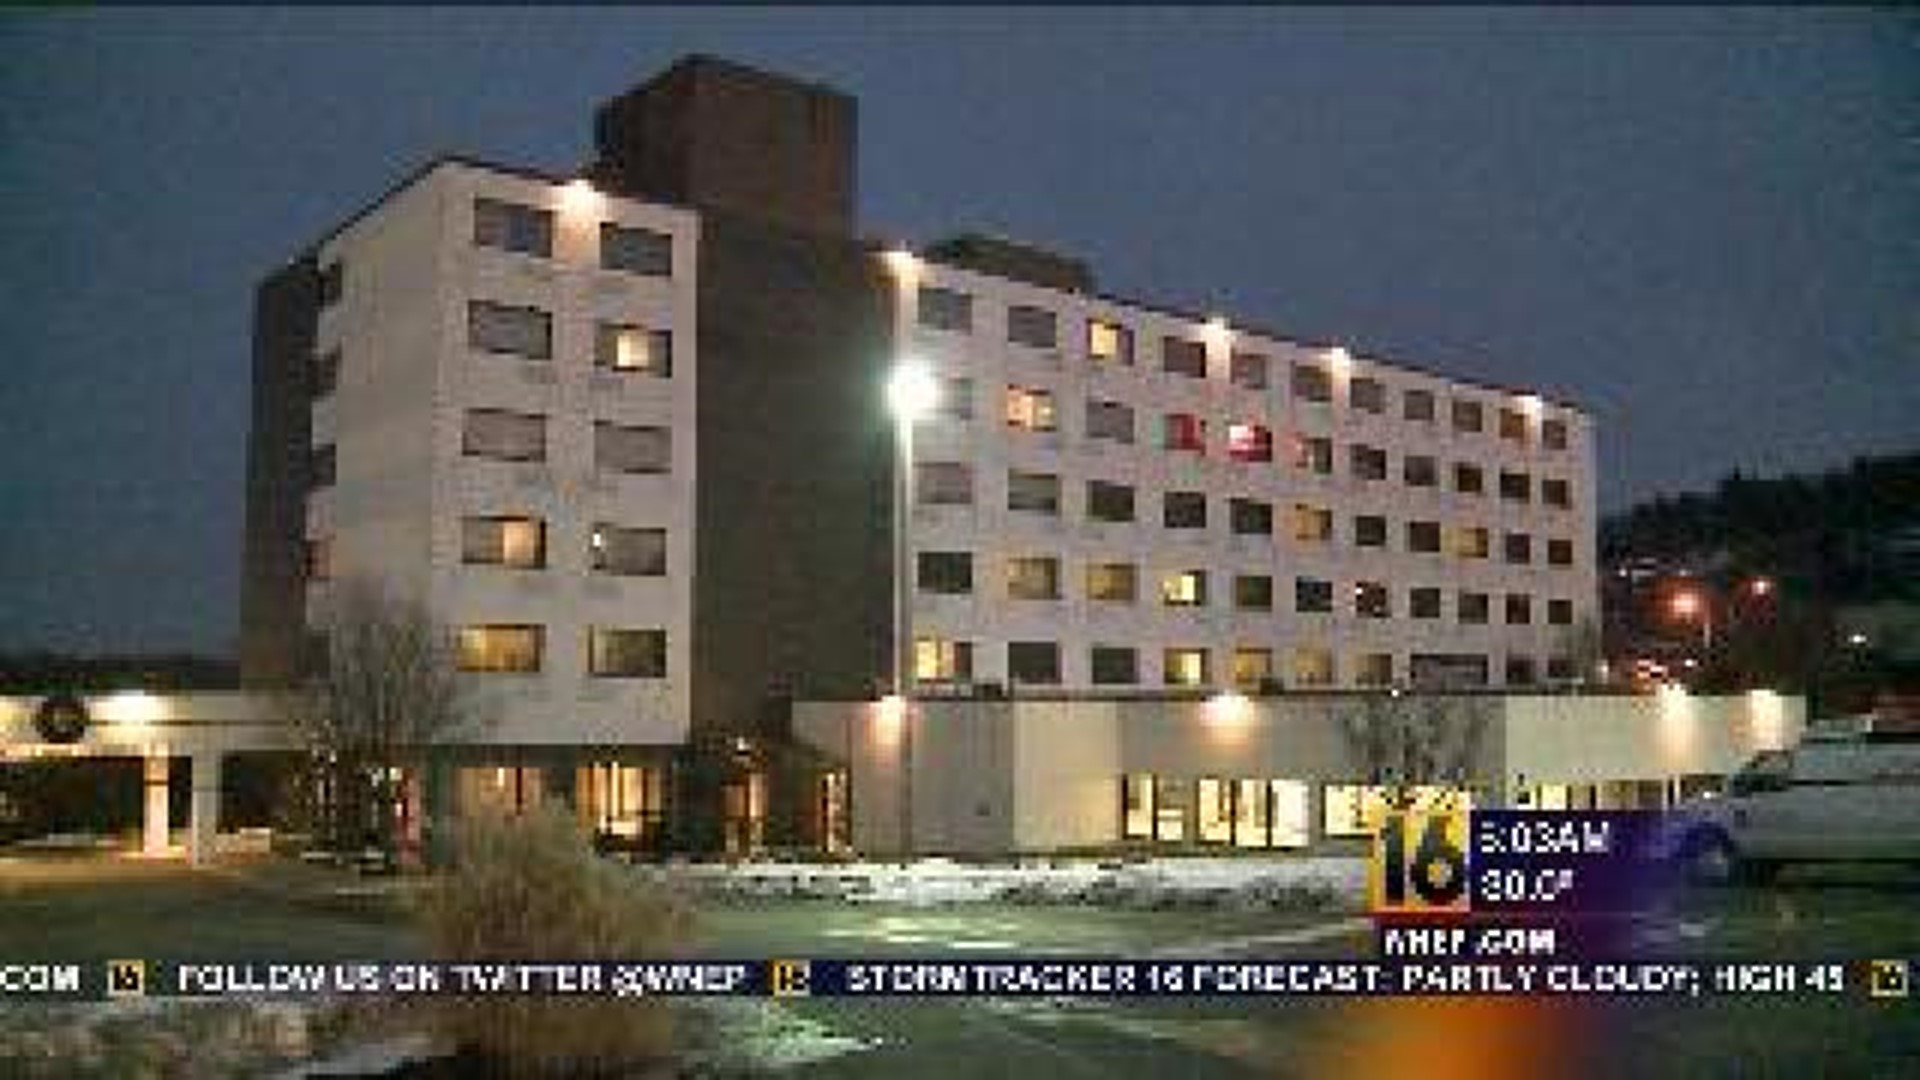 Hotel Shut Down to Inspect Fire Alarms